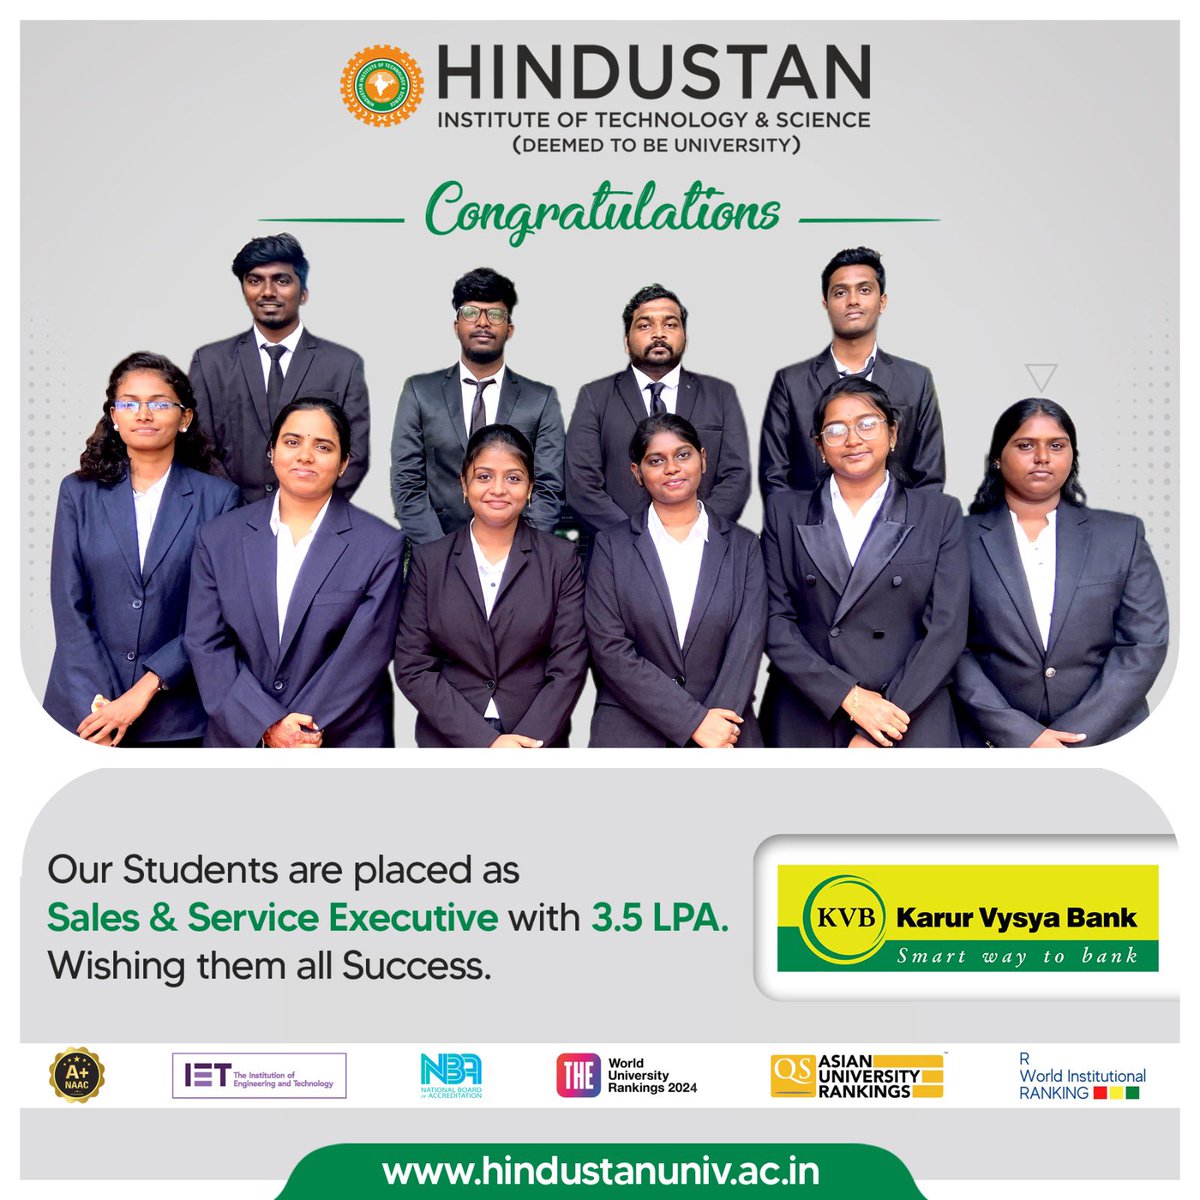 Heartiest congratulations  to our students as they begin their new professional journey!

#HITS #MyHindustan #HindustanUniversity #Hindustangroupofinstitutions #growwithhindustan #dranandjacobverghese #hitsplacement #studentcareer #ranked4inplacement